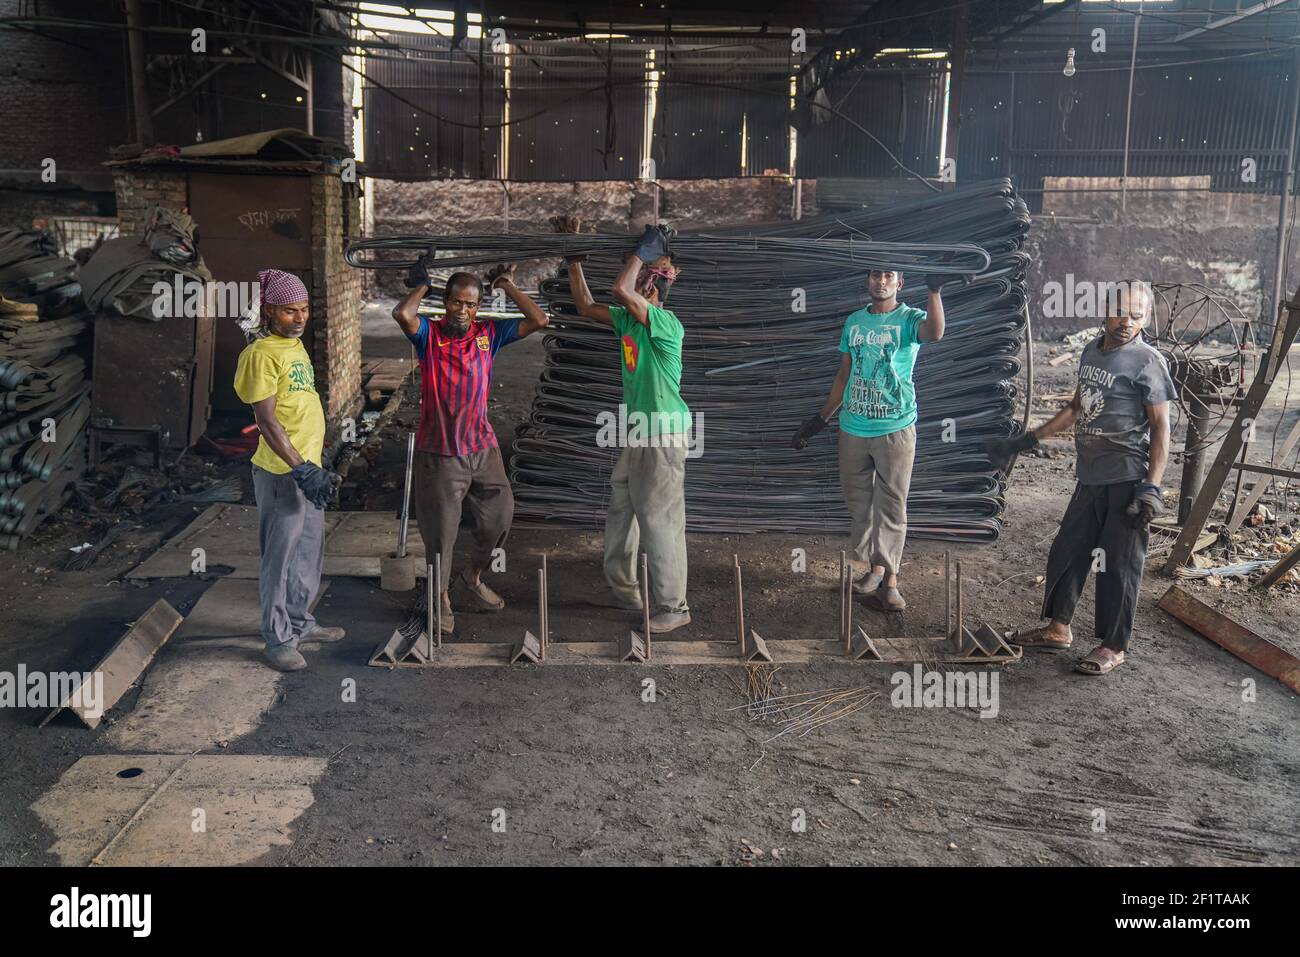 Rolling mill workerS seen working in the steel re-rolling mill without proper safety gear or tools in Dhaka, Bangladesh on March 9, 2021. Stock Photo